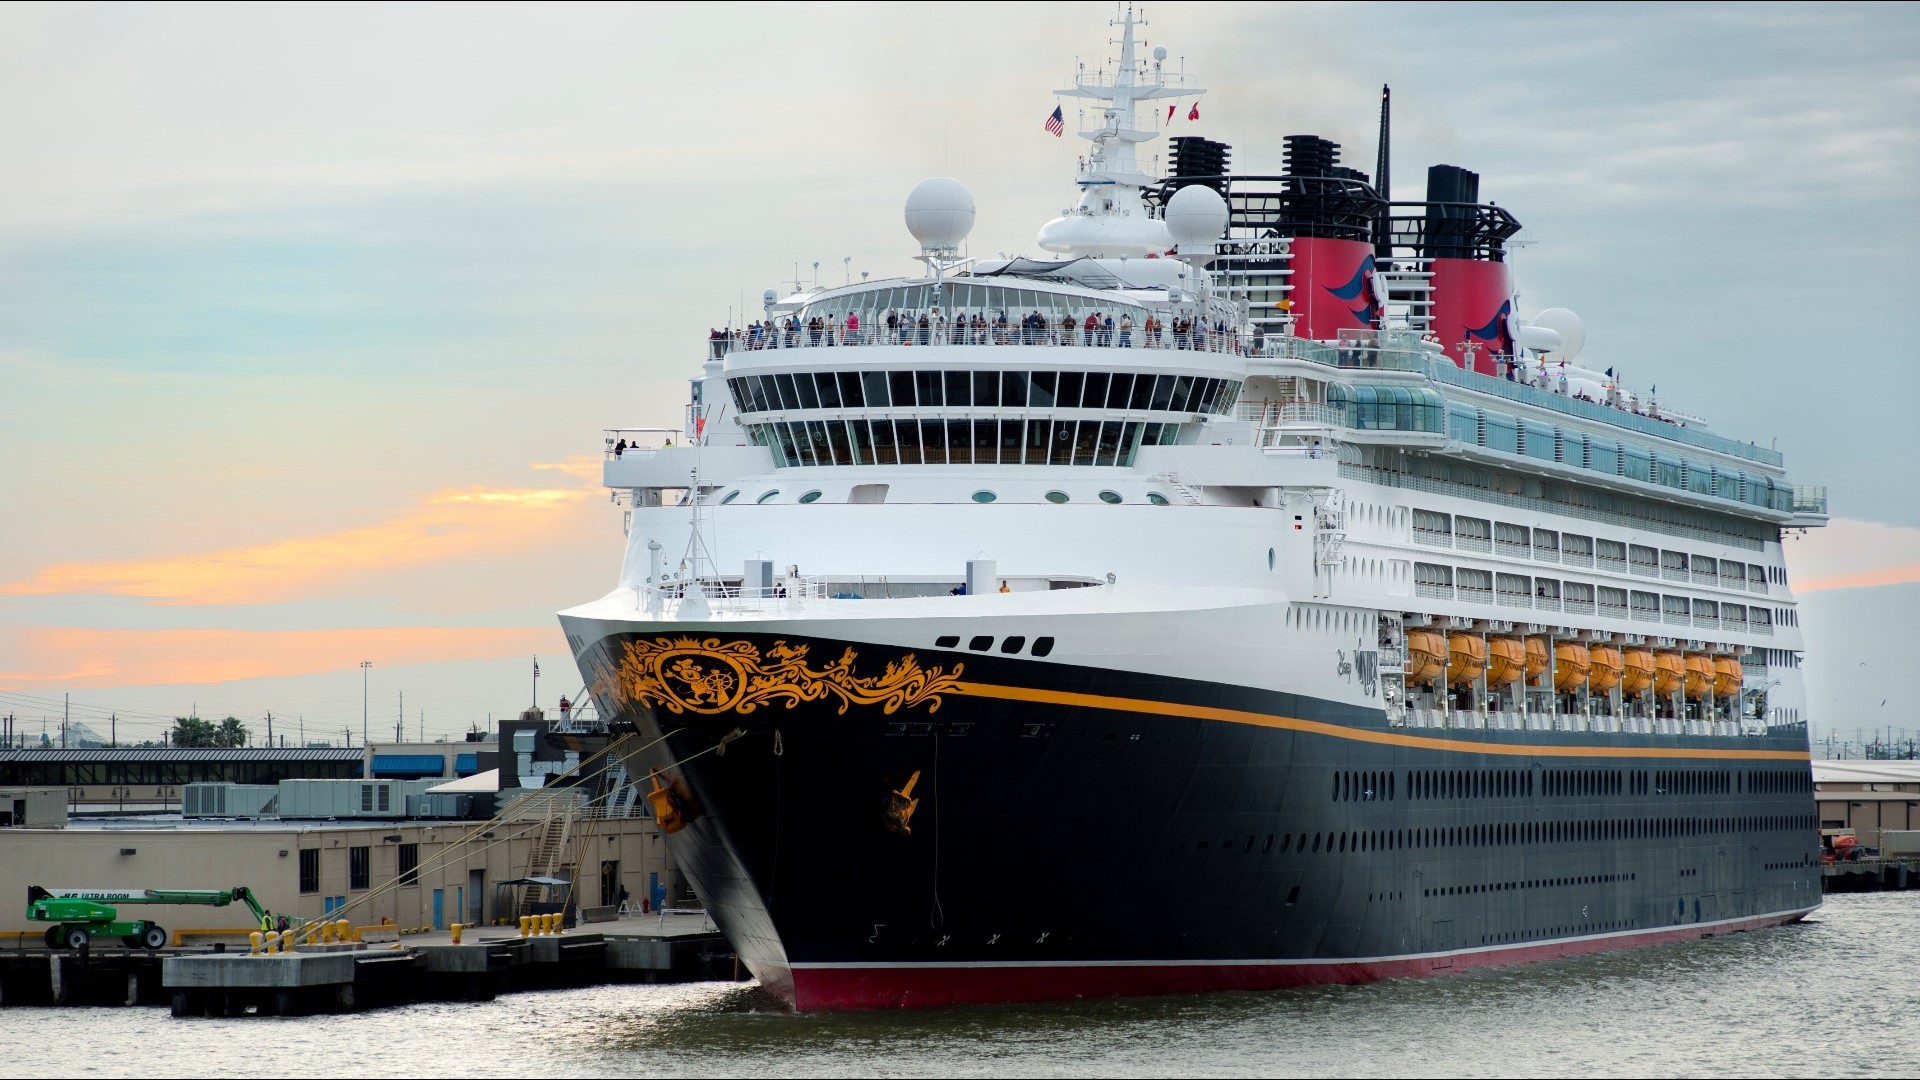 Good news if you want to take a Disney cruise out of Galveston!